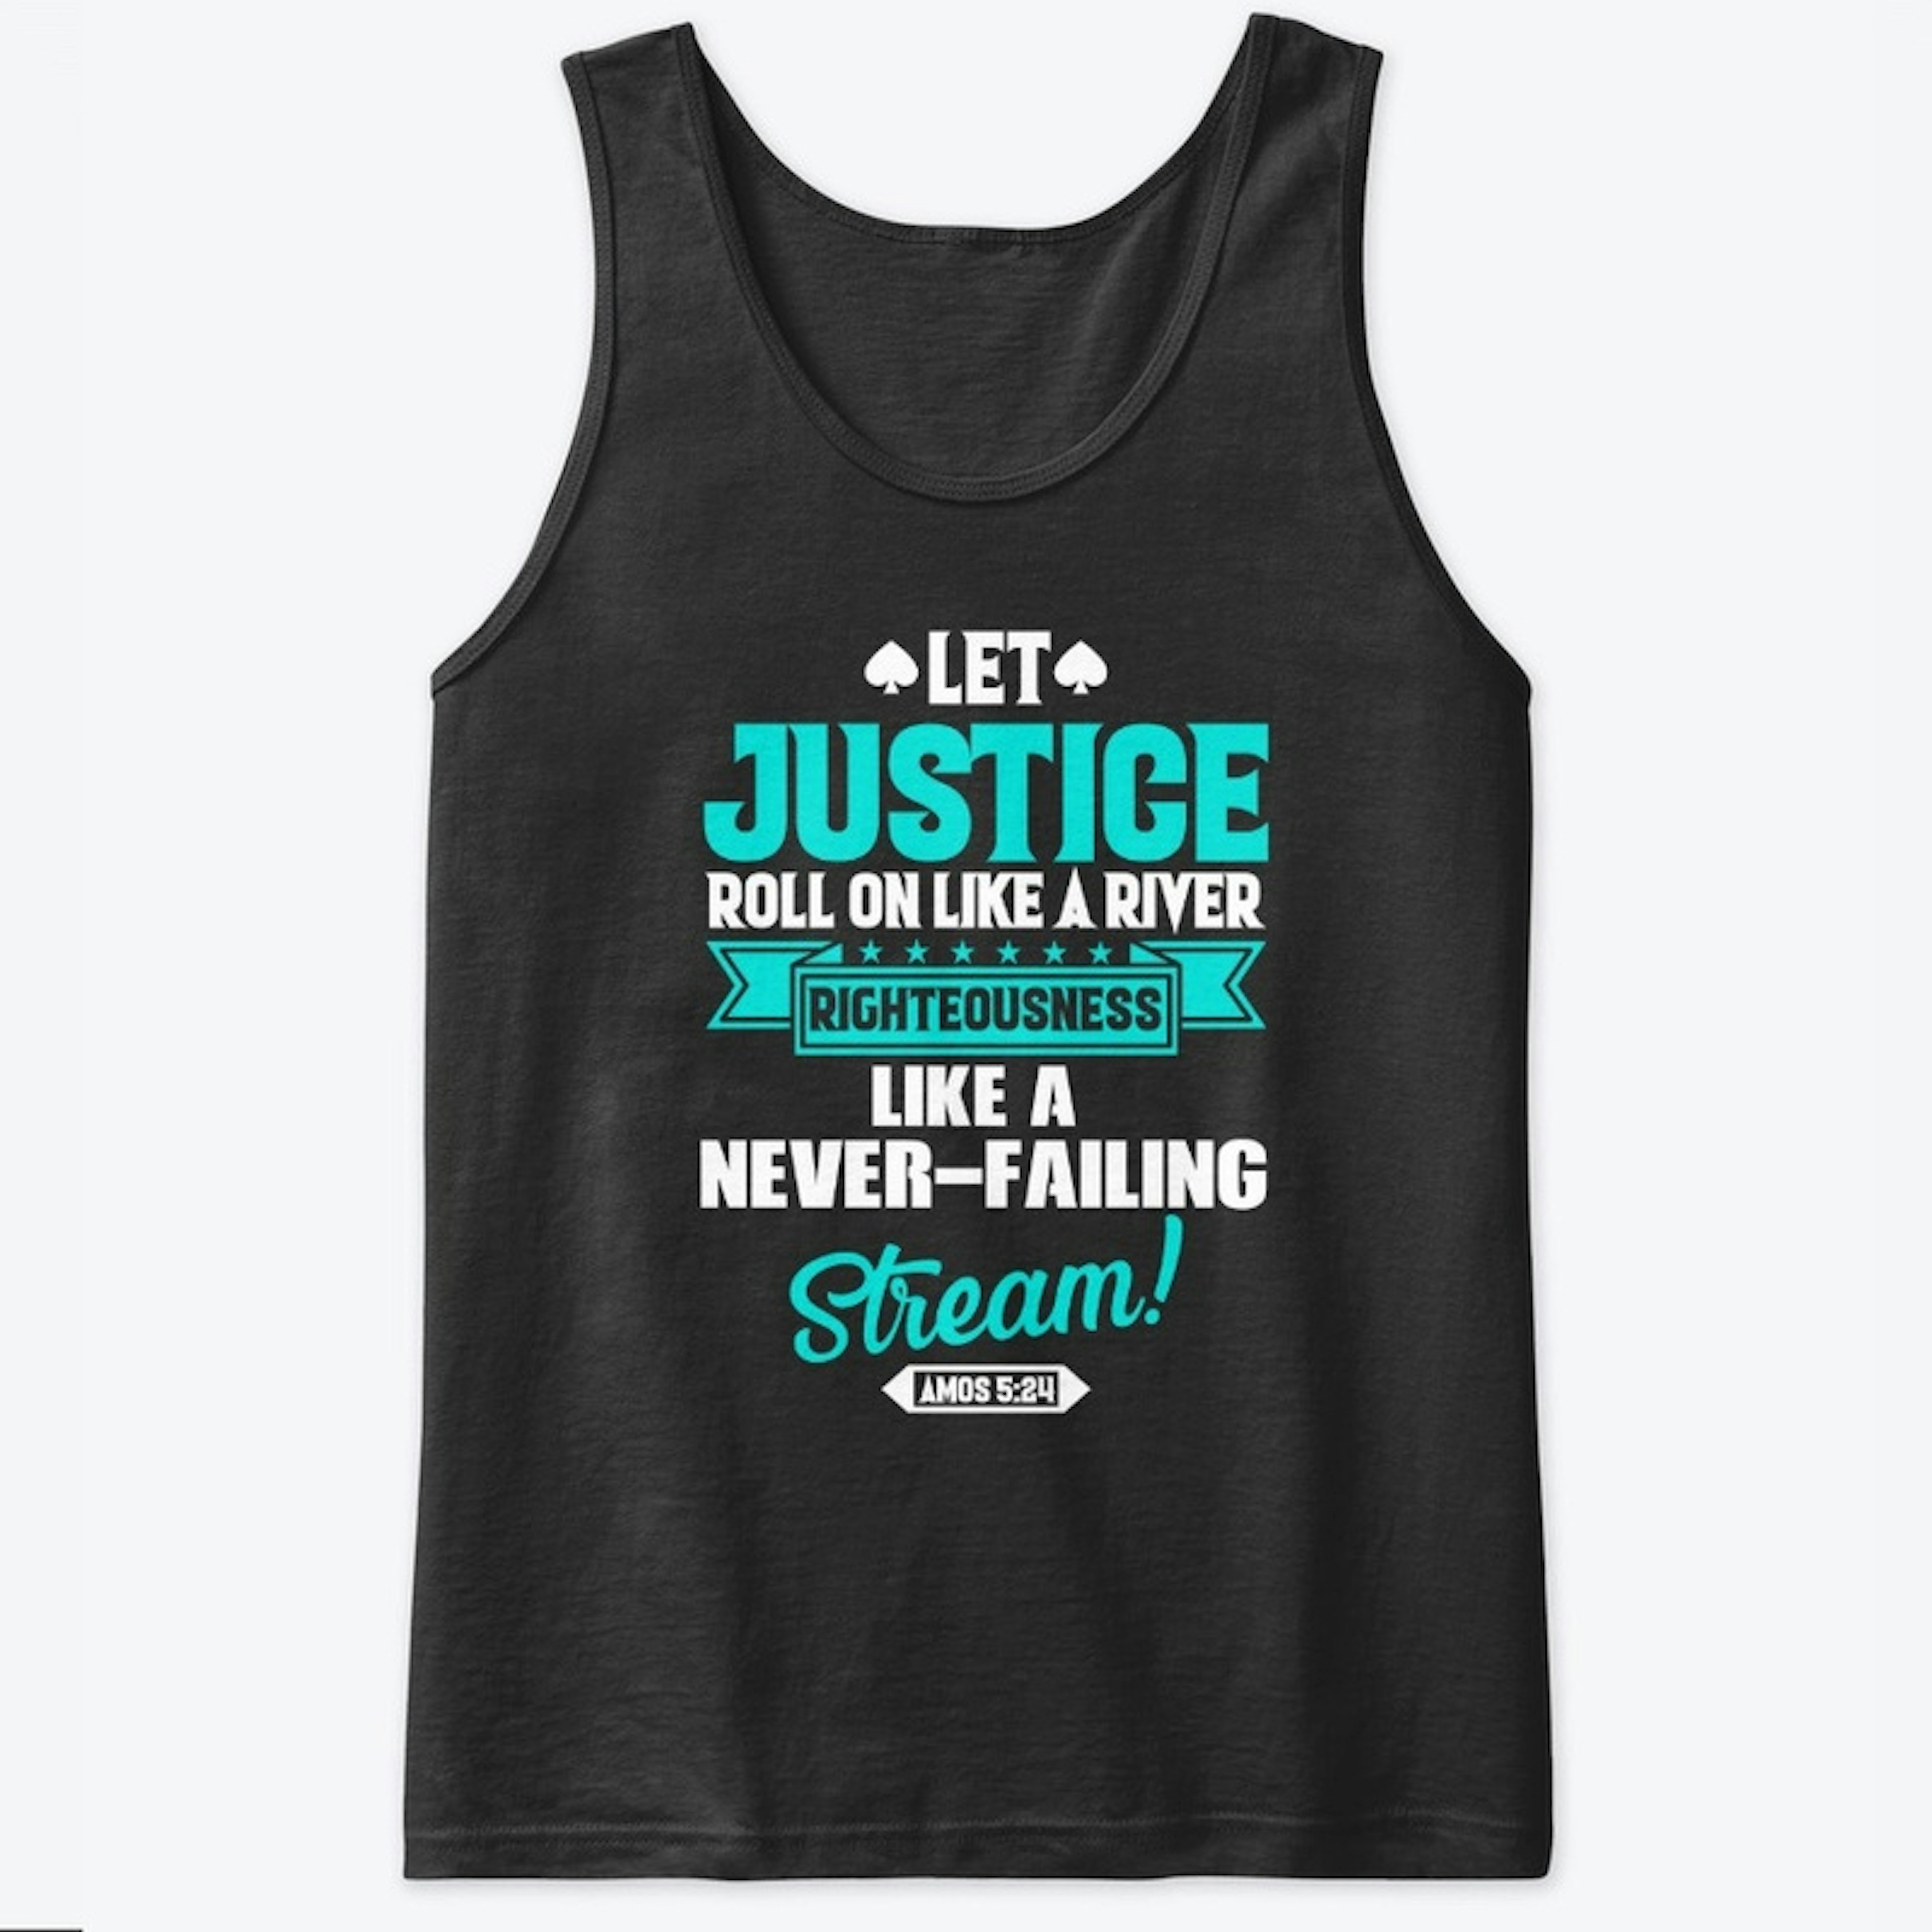 Christian Tees about justice